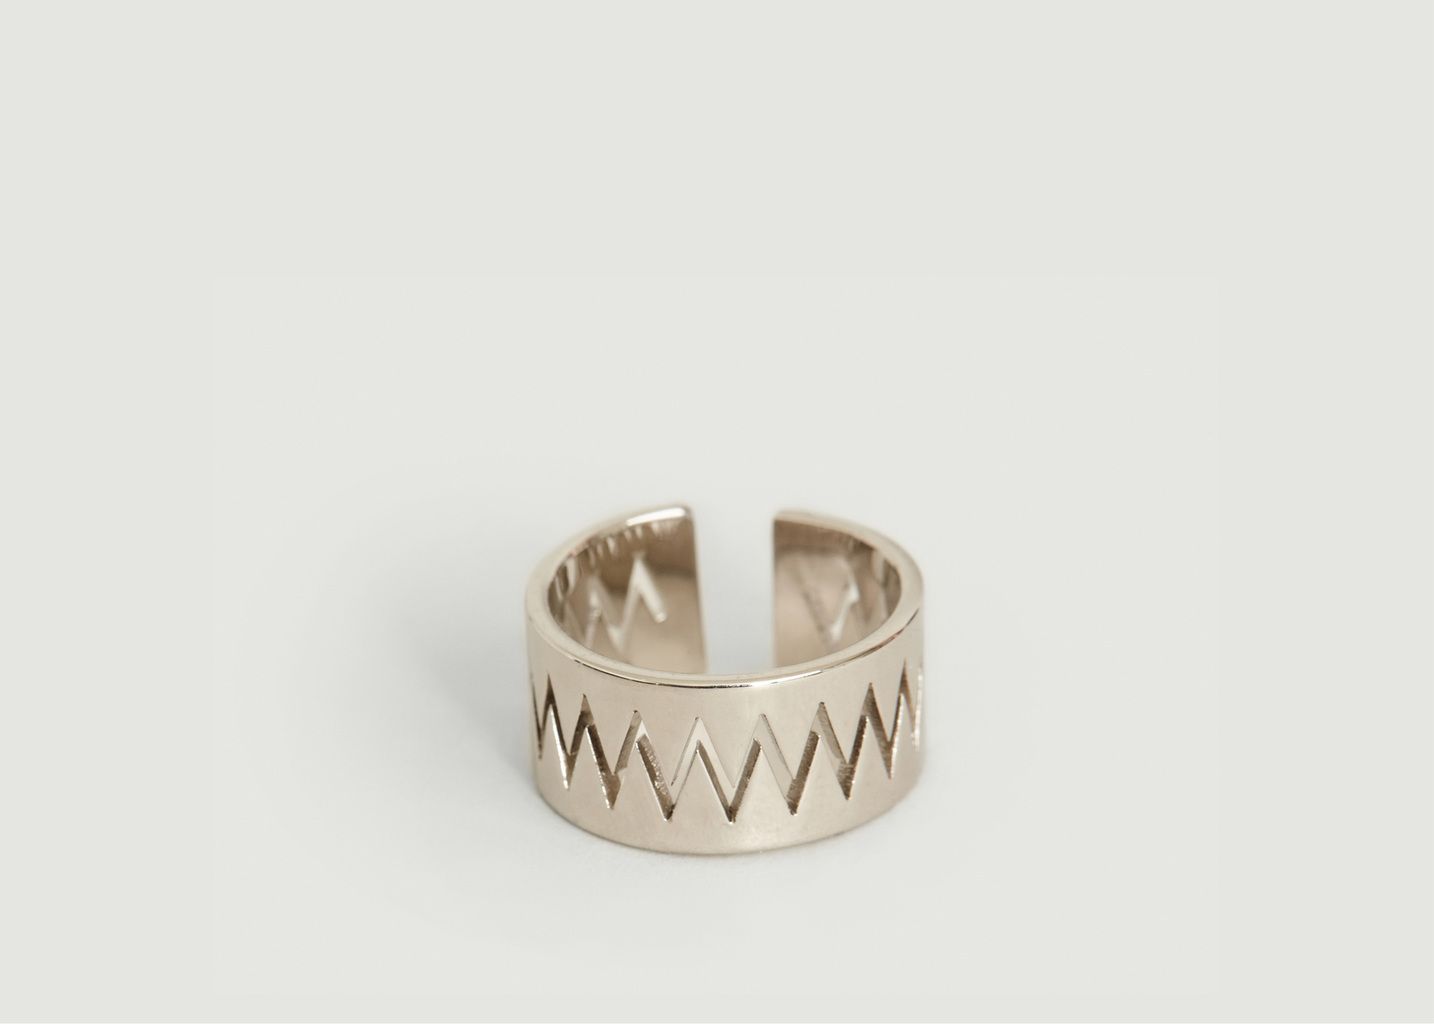 Band Carnivore Ring - Annelise Michelson